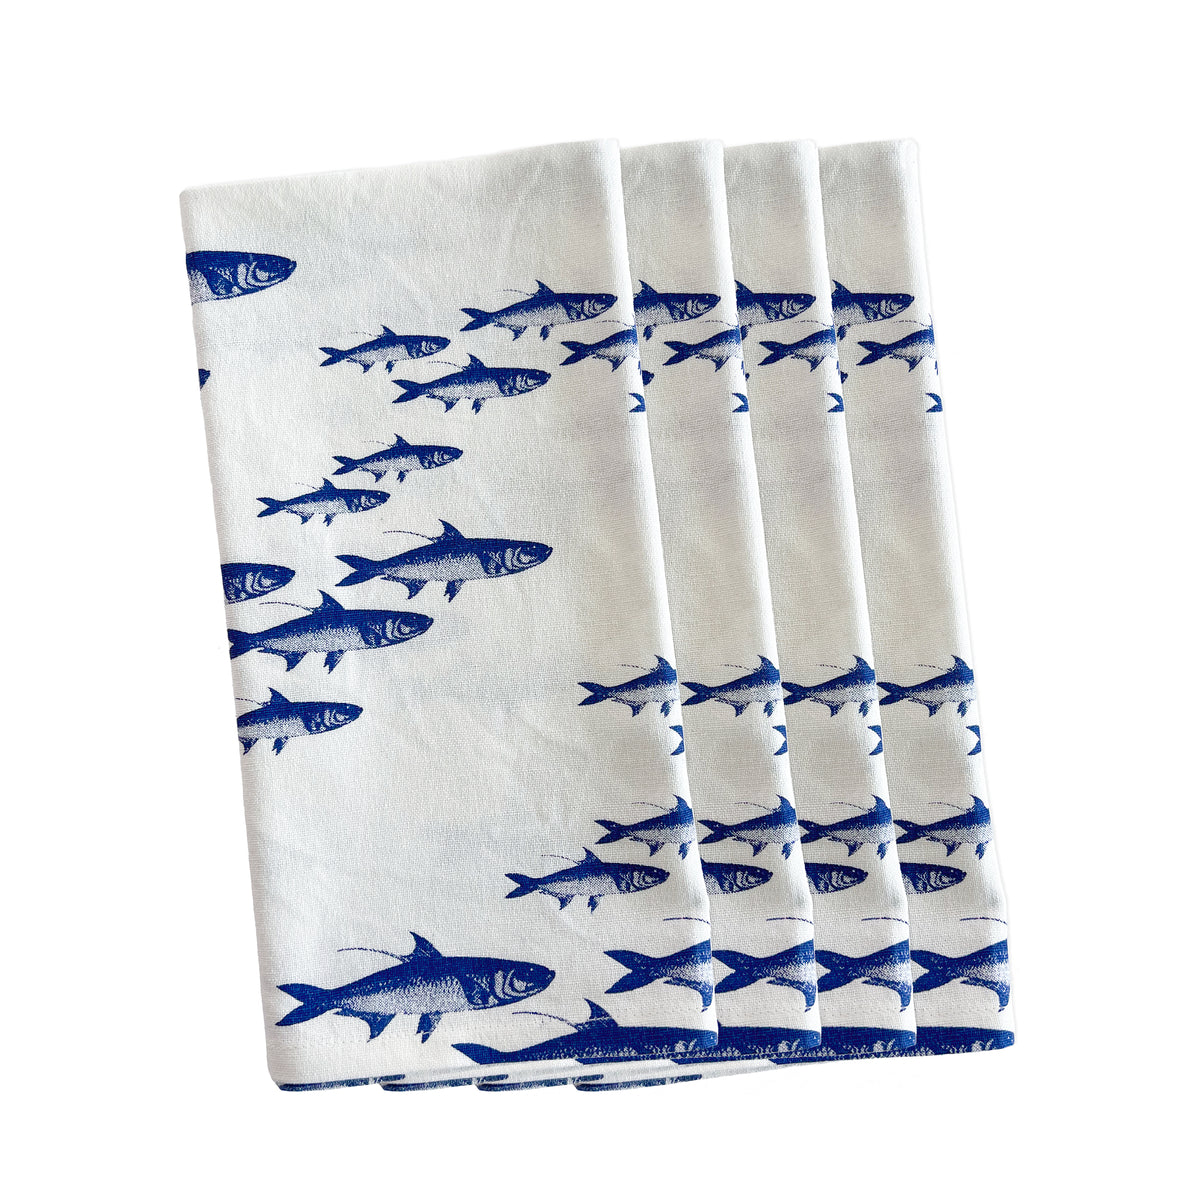 School of Fish 100% Cotton Napkins in Blue and White sold as a set of 4 from Caskata